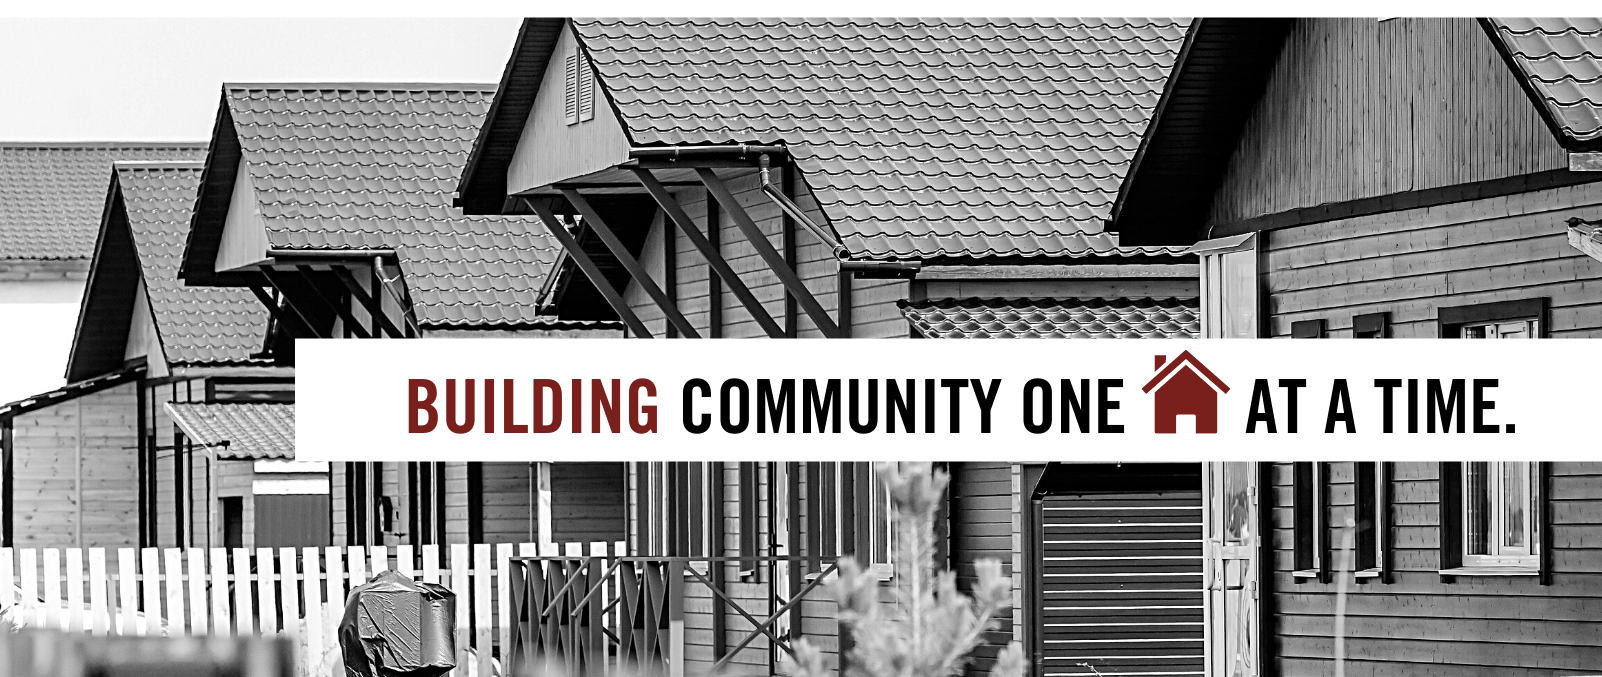 Building community one home at a time. Text on Black and white homes background.